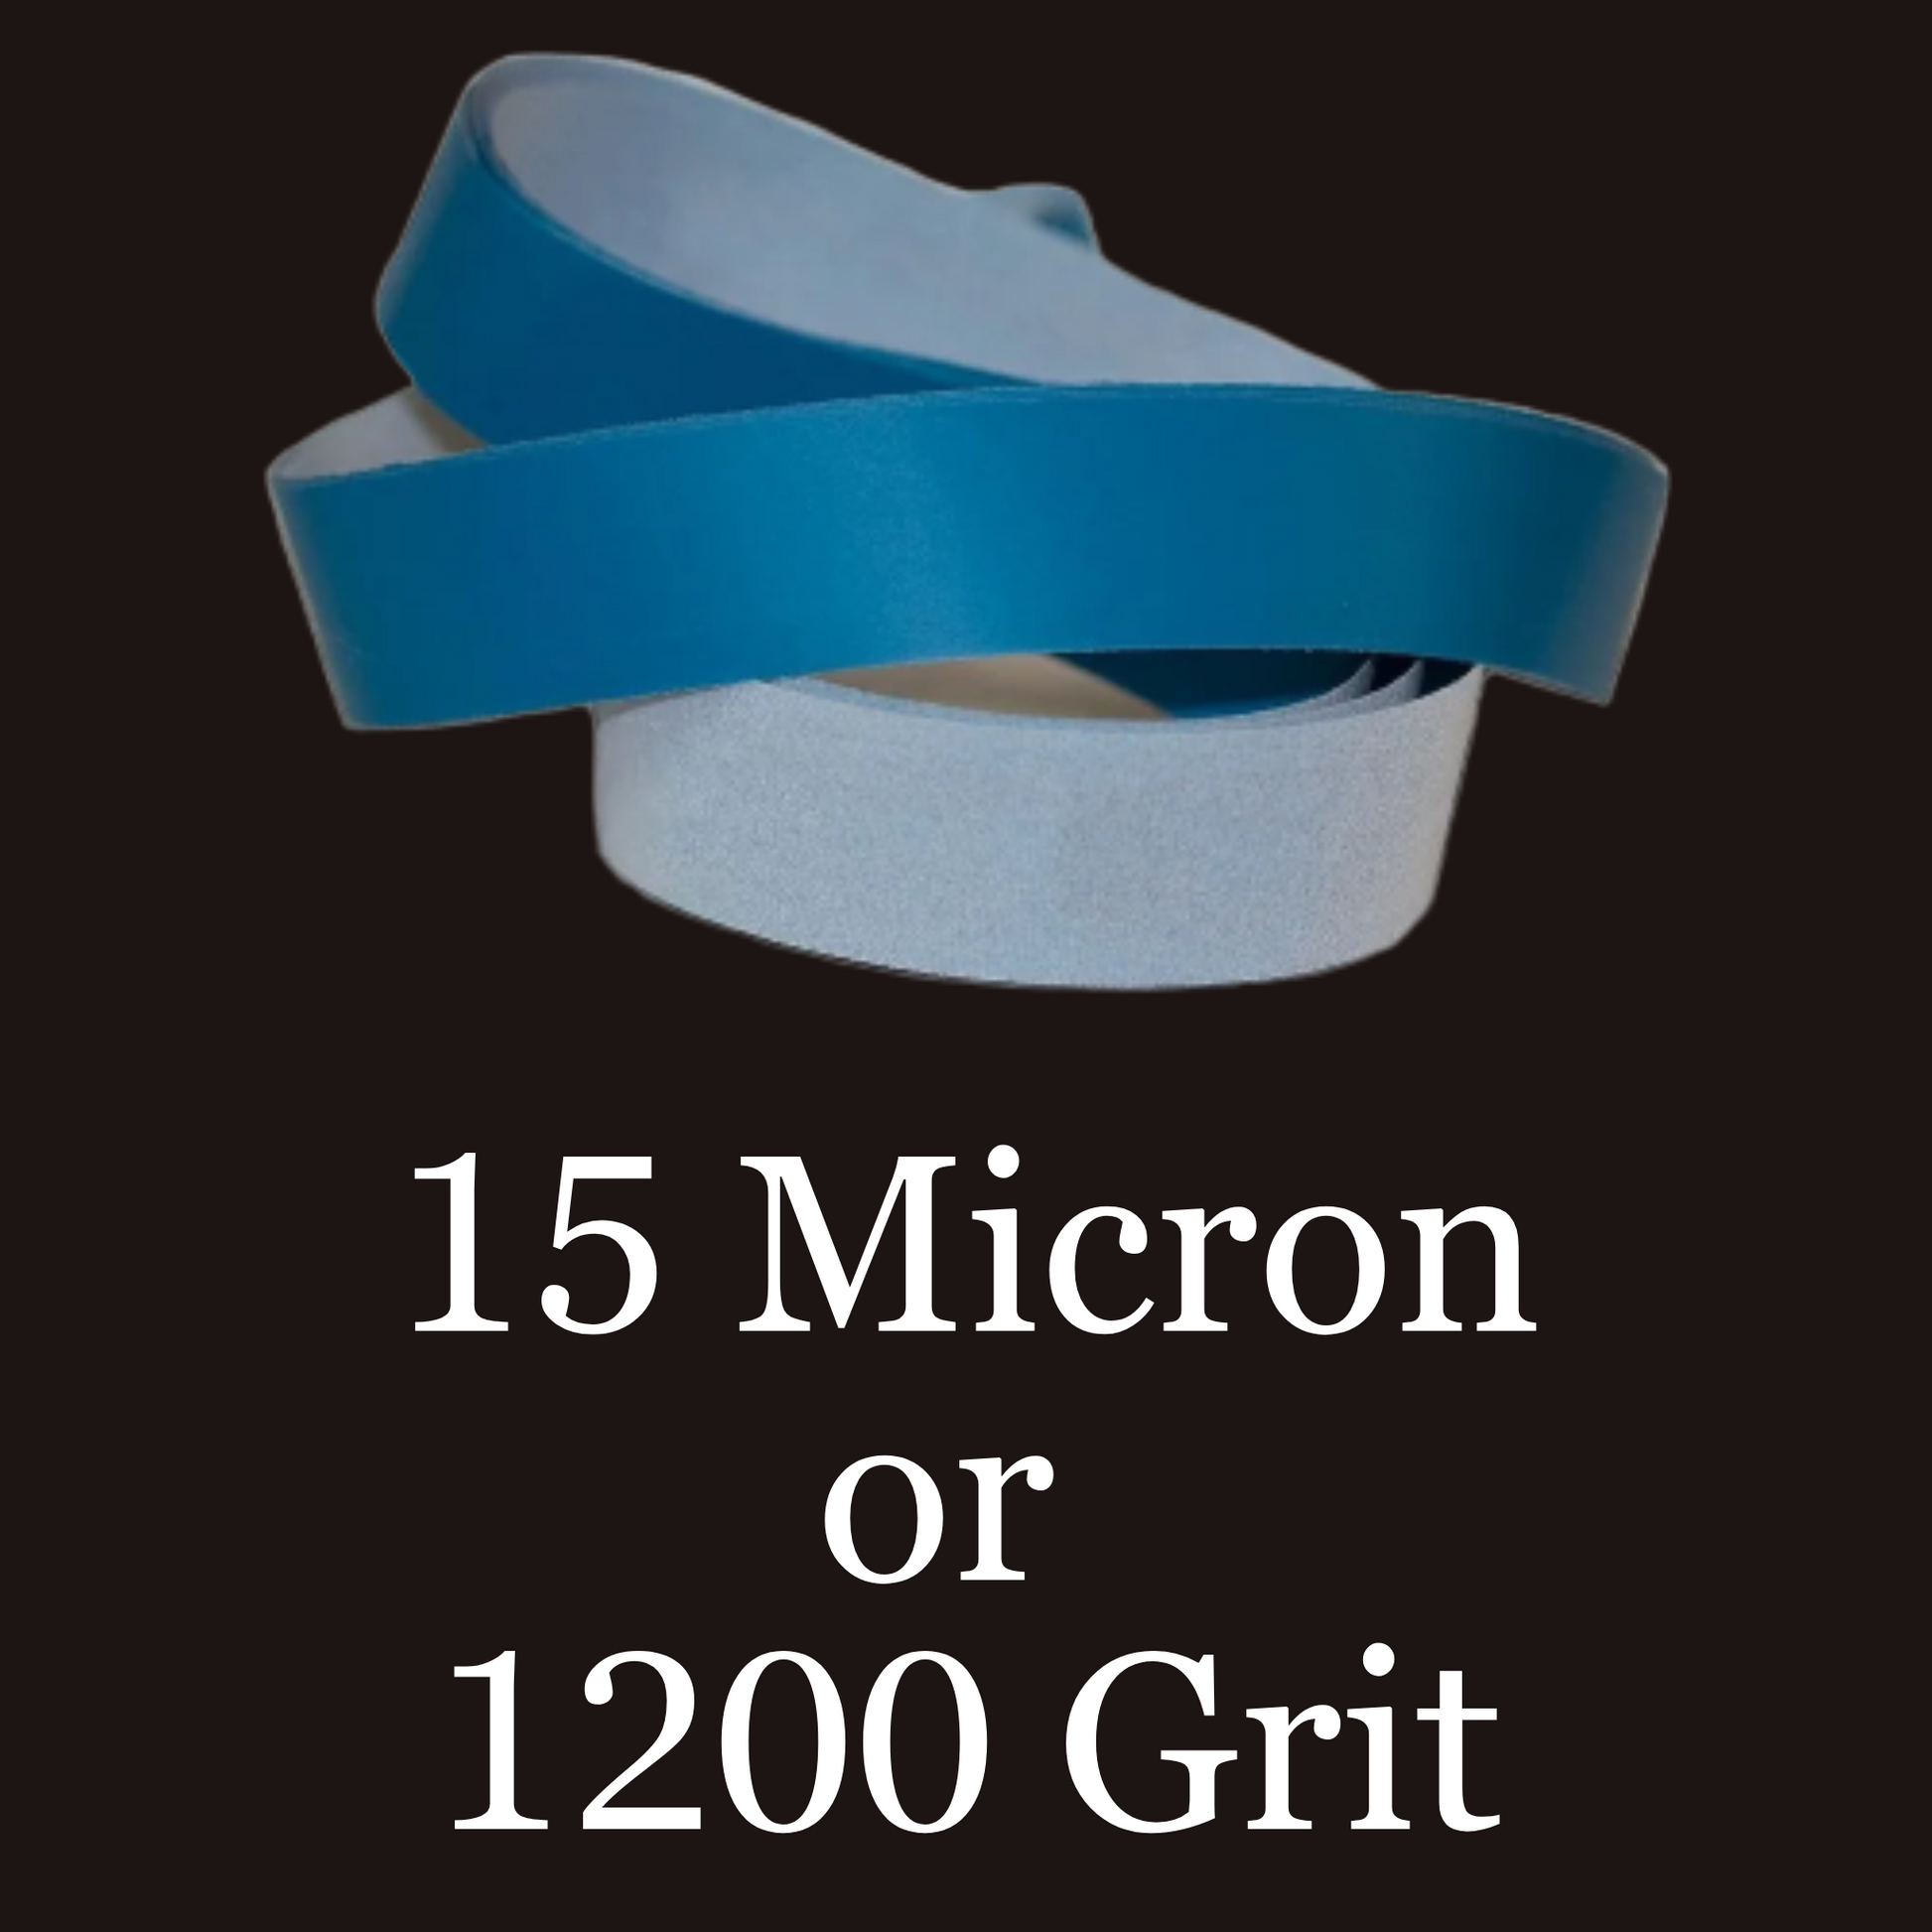 1” x 72” Film Micron Graded Finishing Belts 15 Micron or 1200 Grit